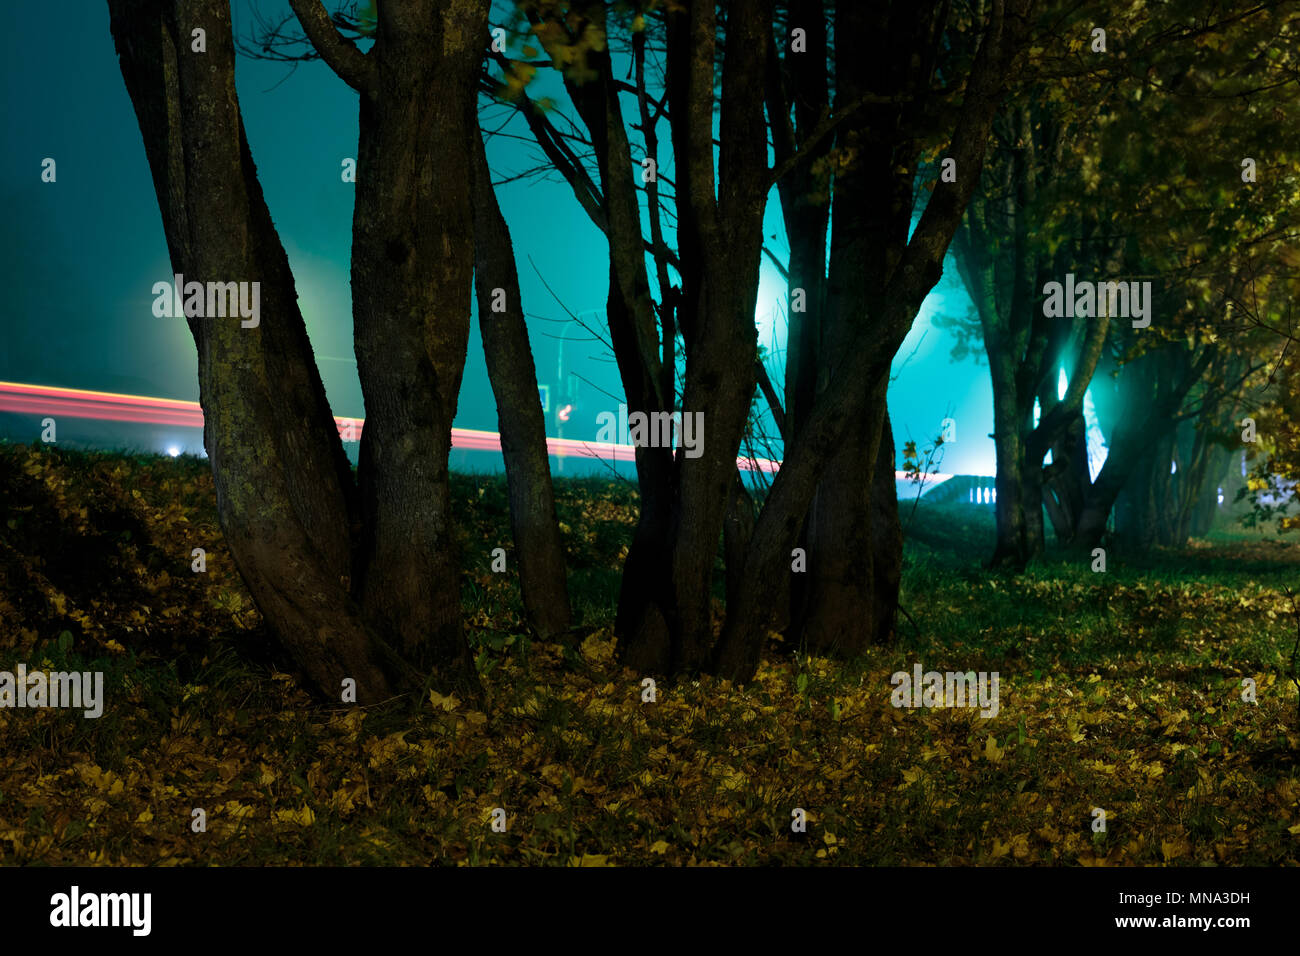 trees near the road at night photo with endurance Stock Photo